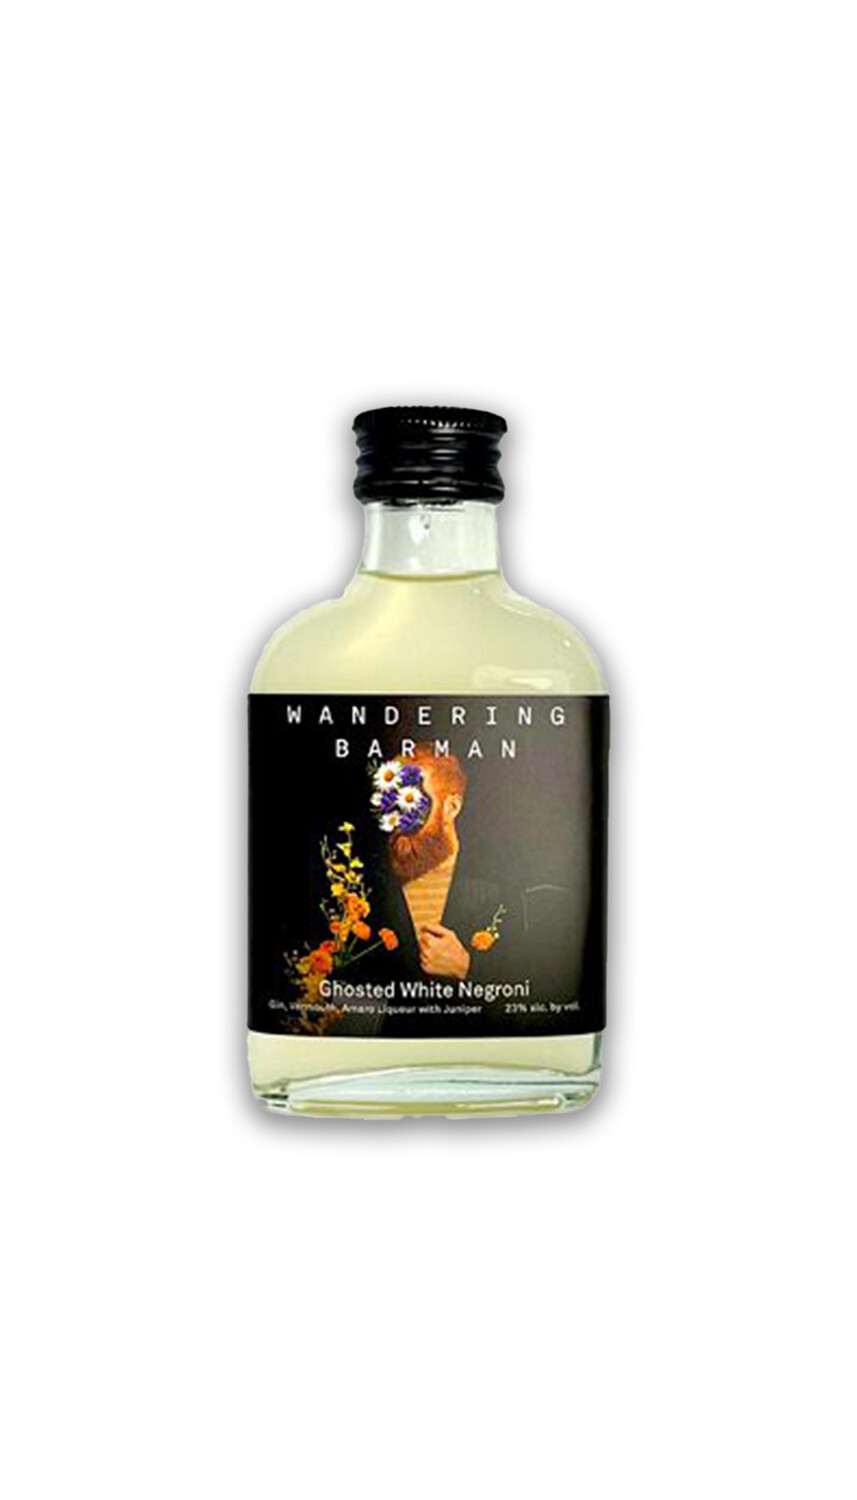 Wandering Barman Ghosted White Negroni